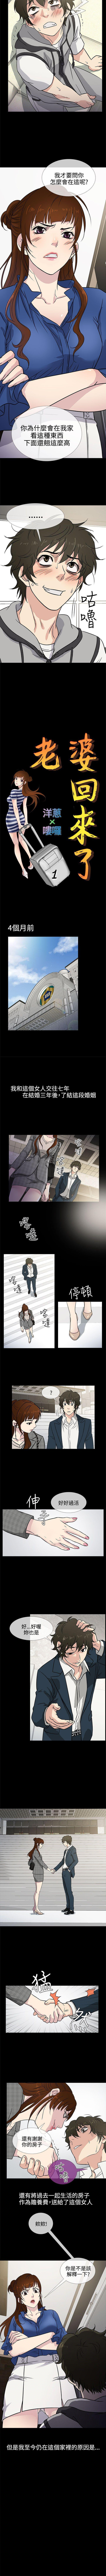 Roughsex 老婆 回來了 1-44 Awesome - Page 5